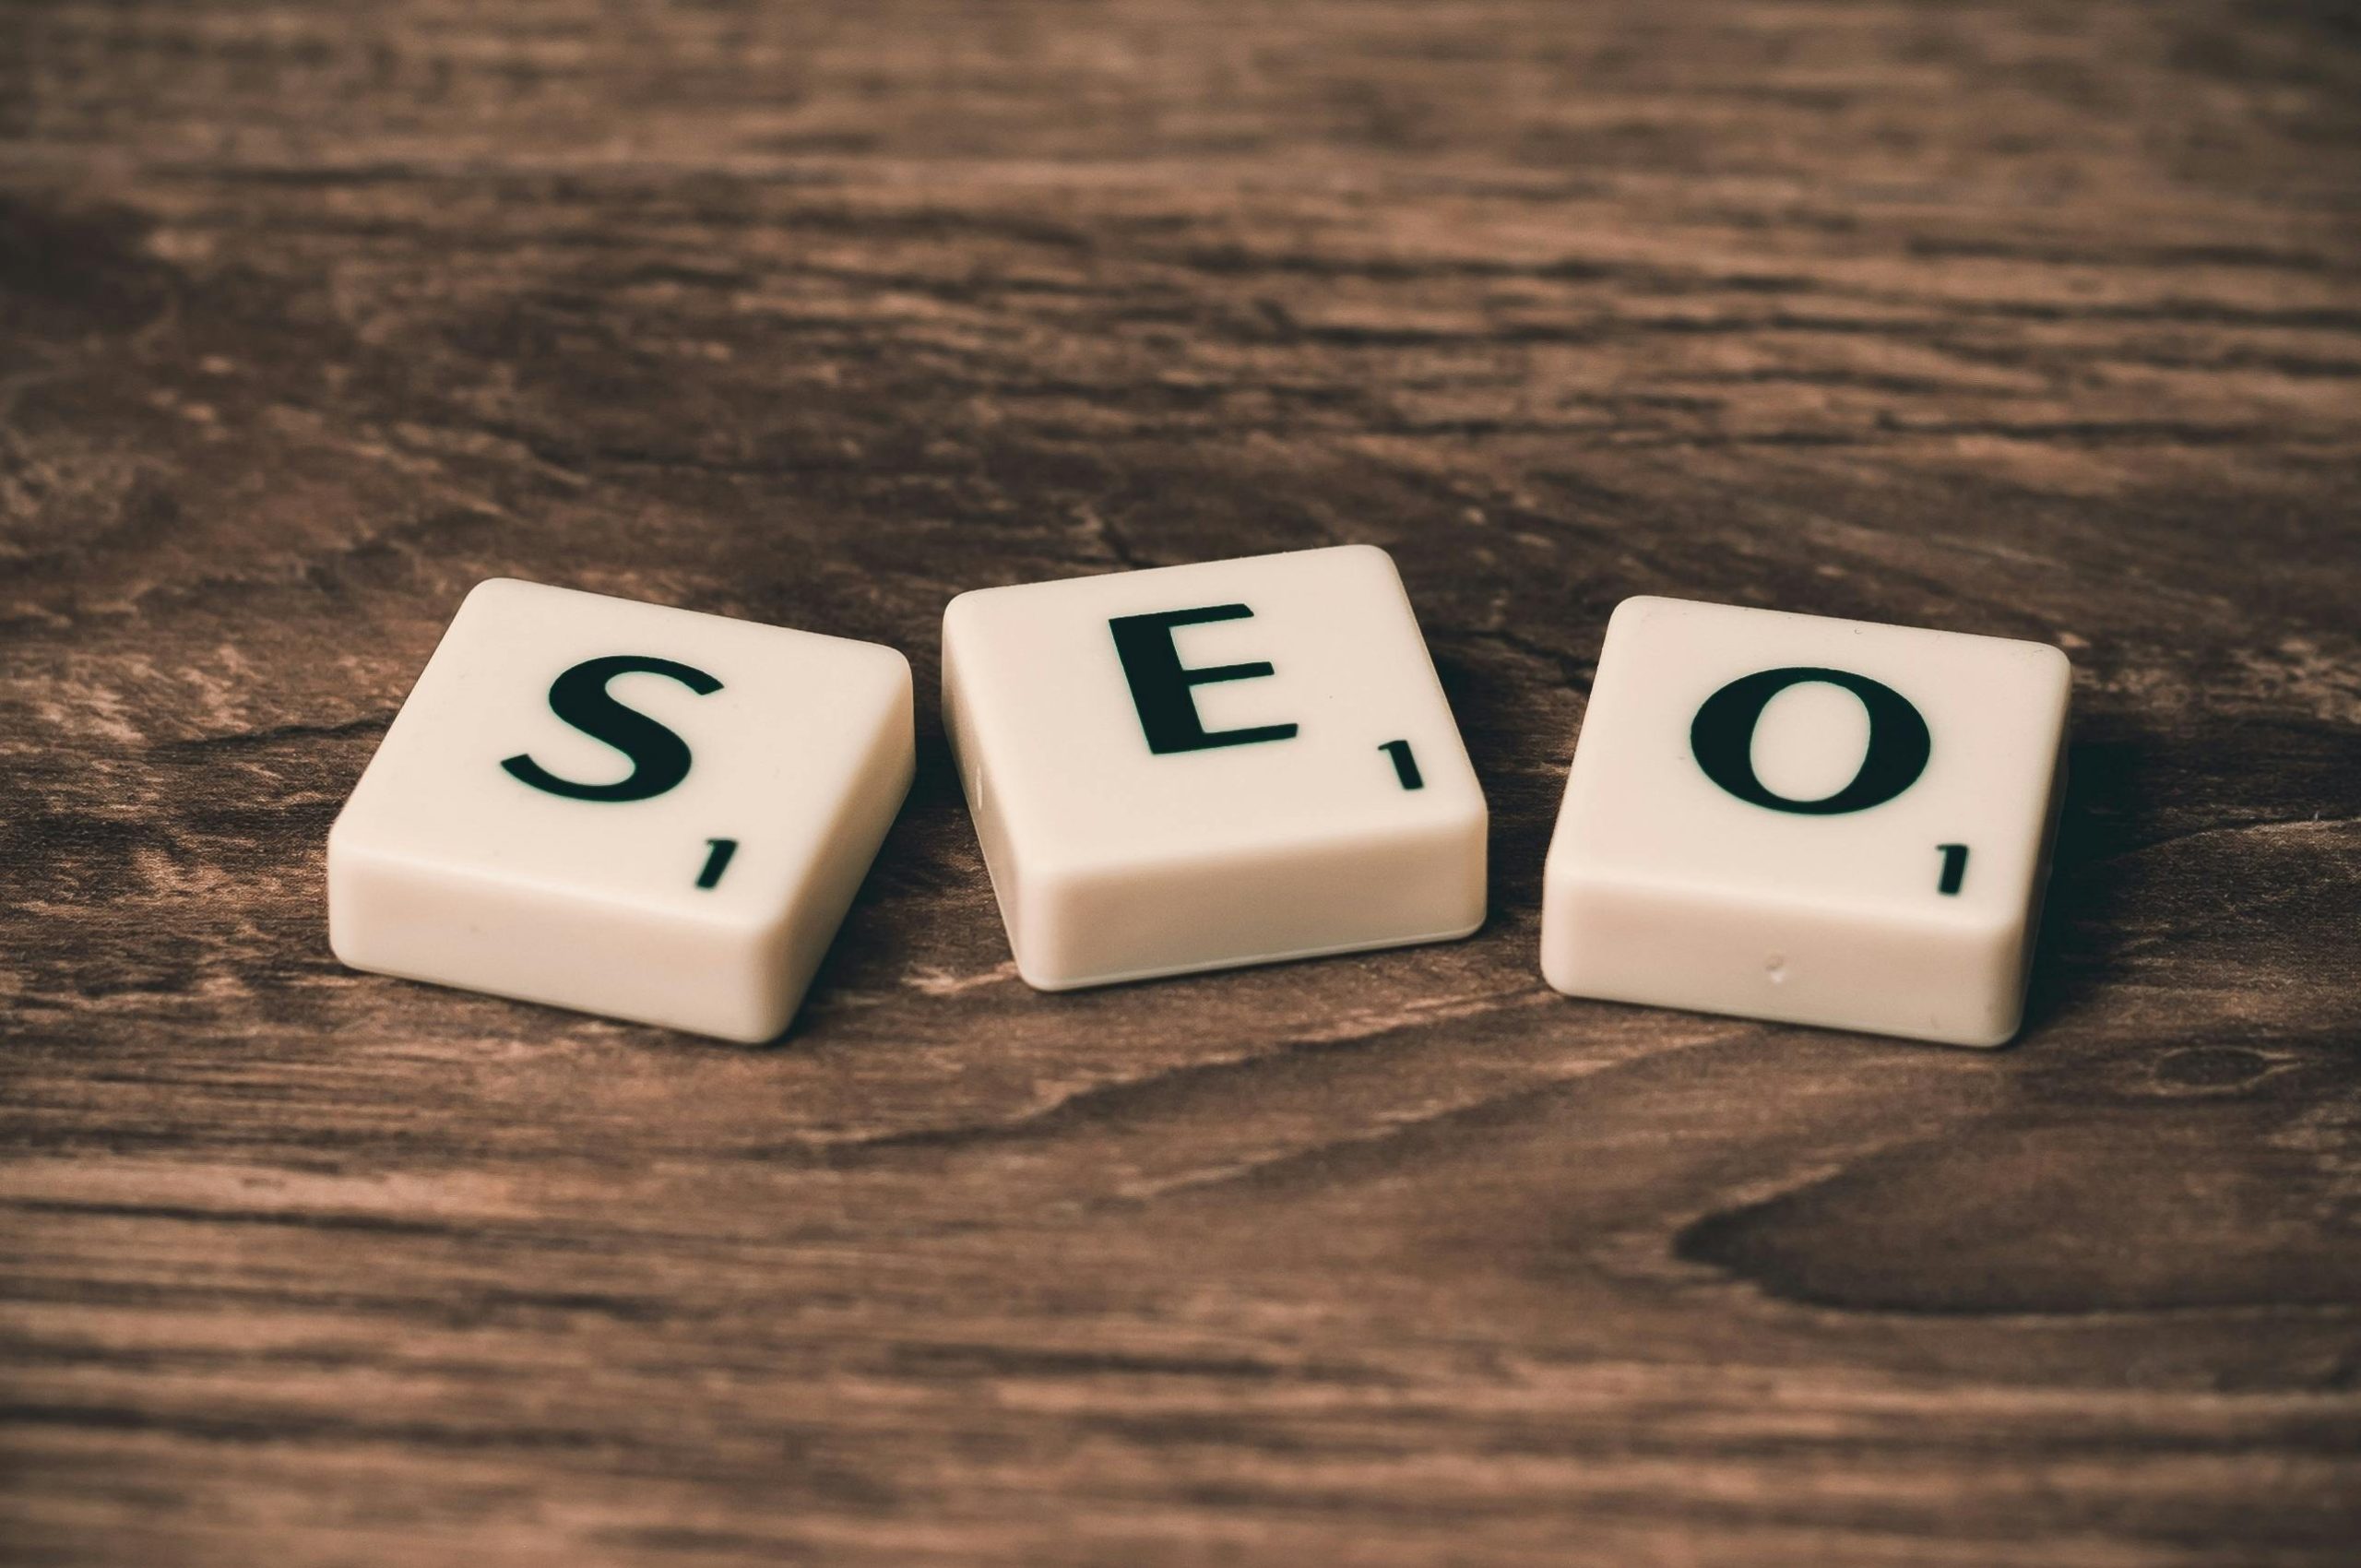 off page seo services